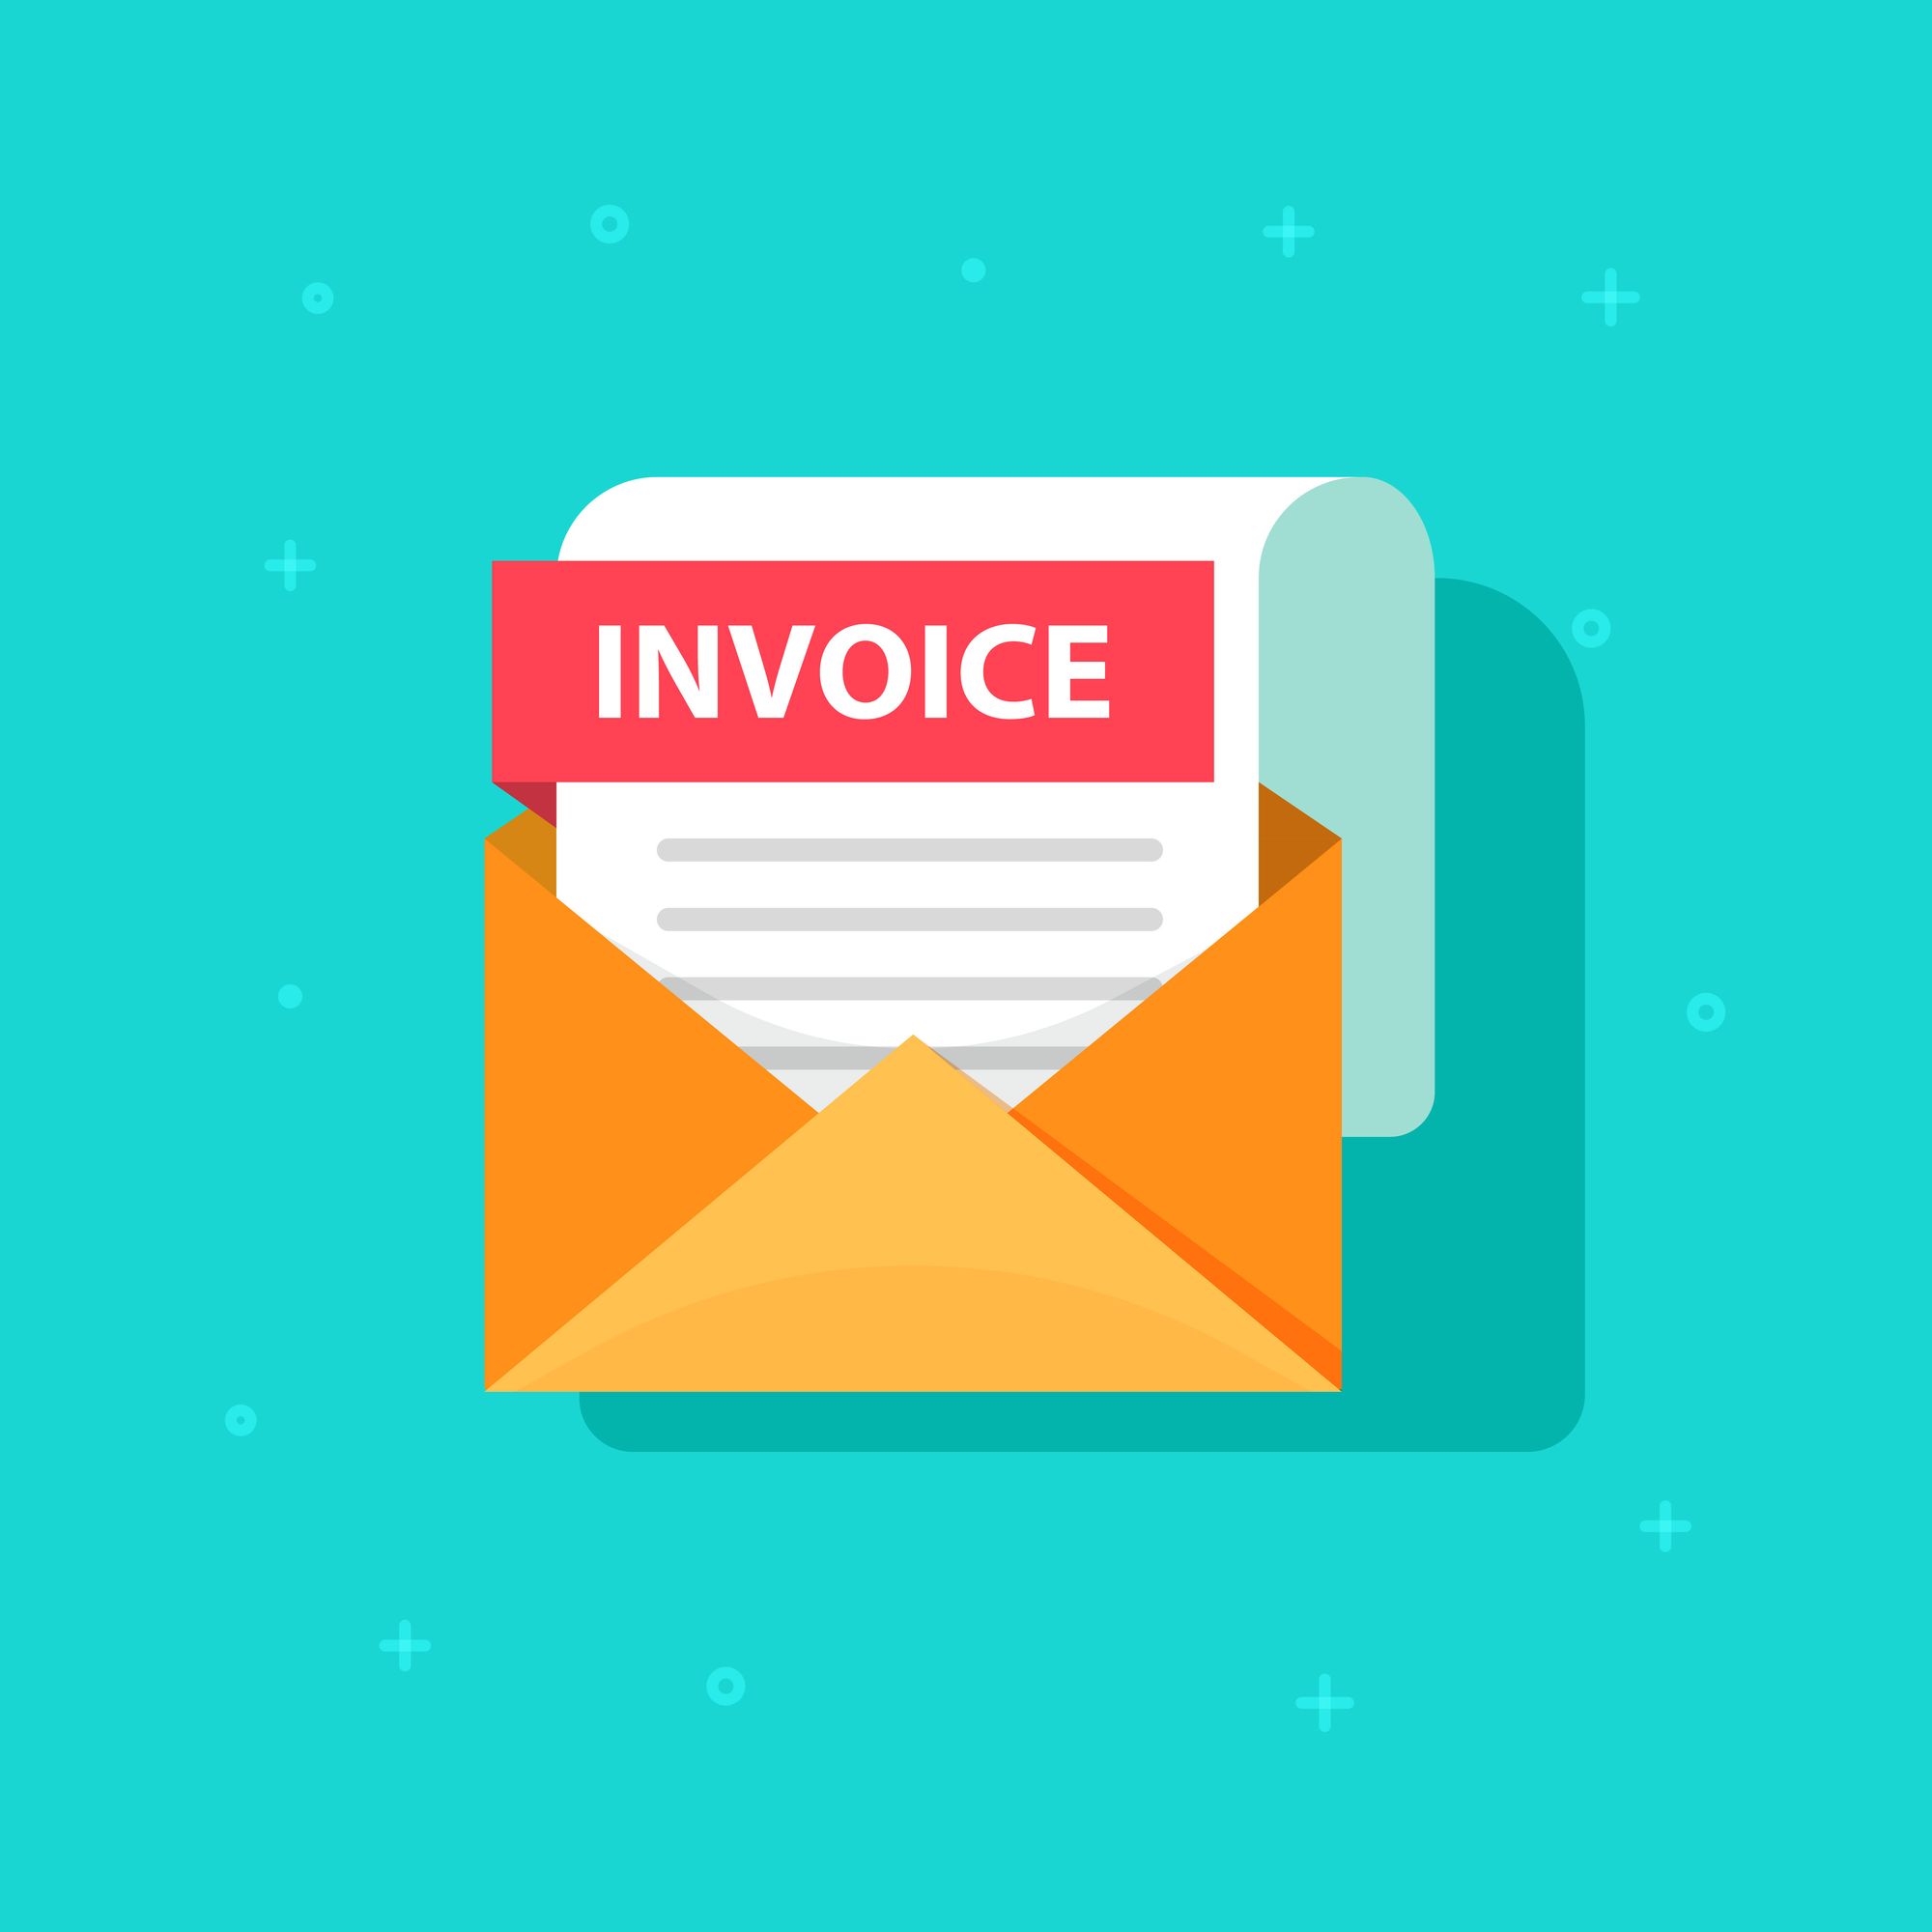 What is an Open Invoice? How does it work?